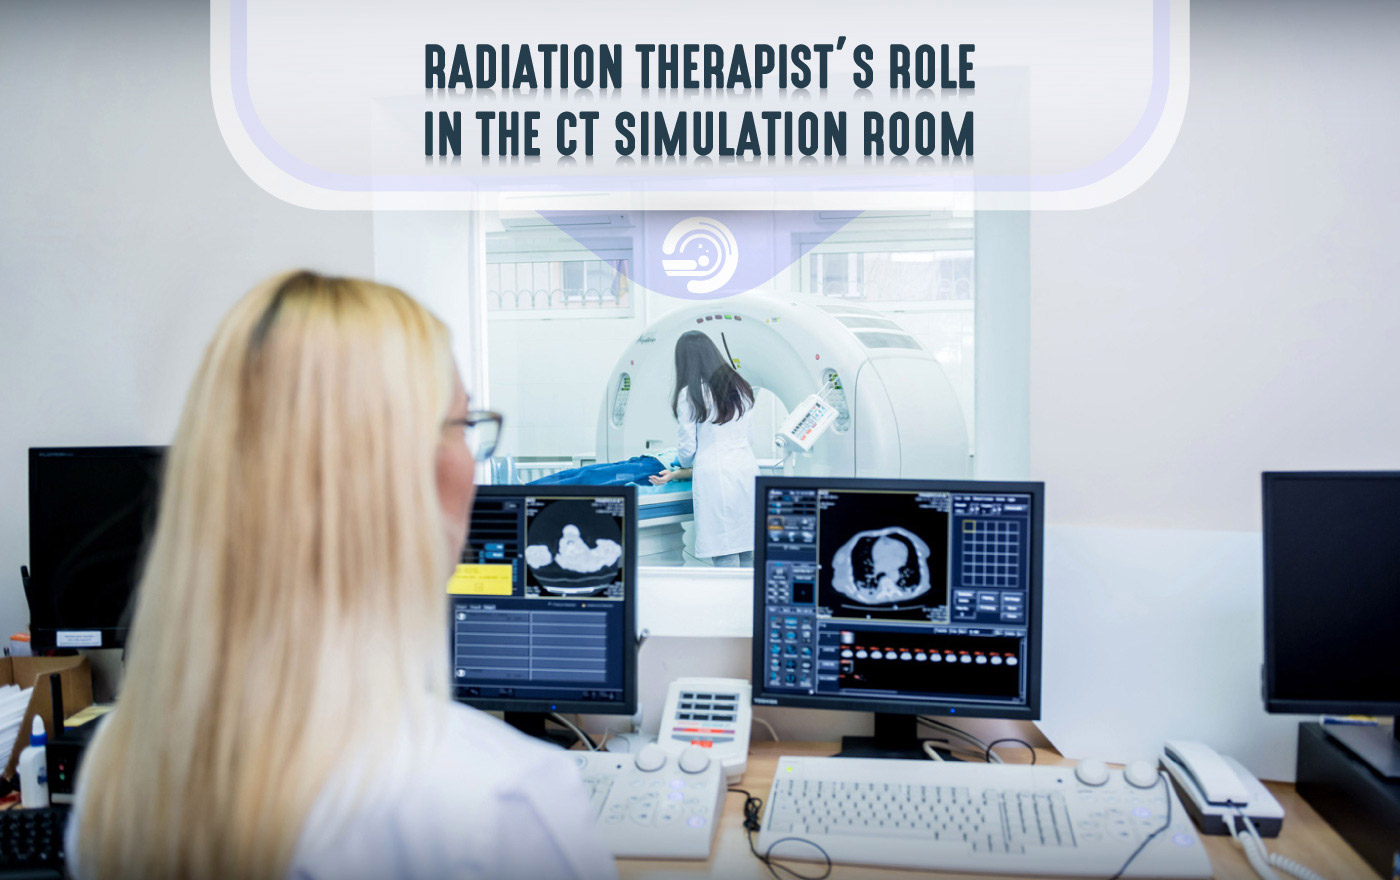 Radiation Therapists' Role in the CT Simulation Room